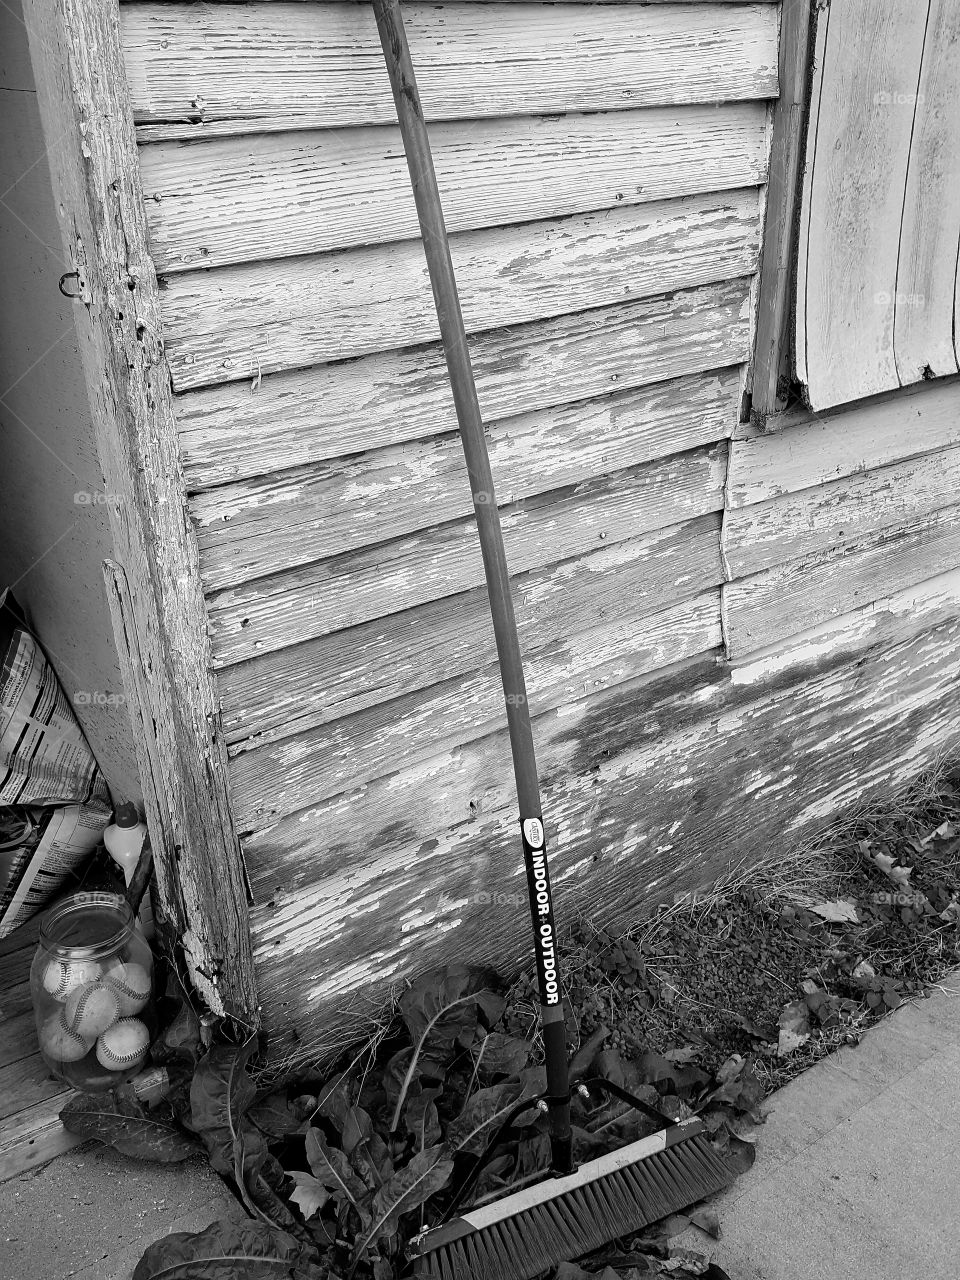 Our old shed in black and white.